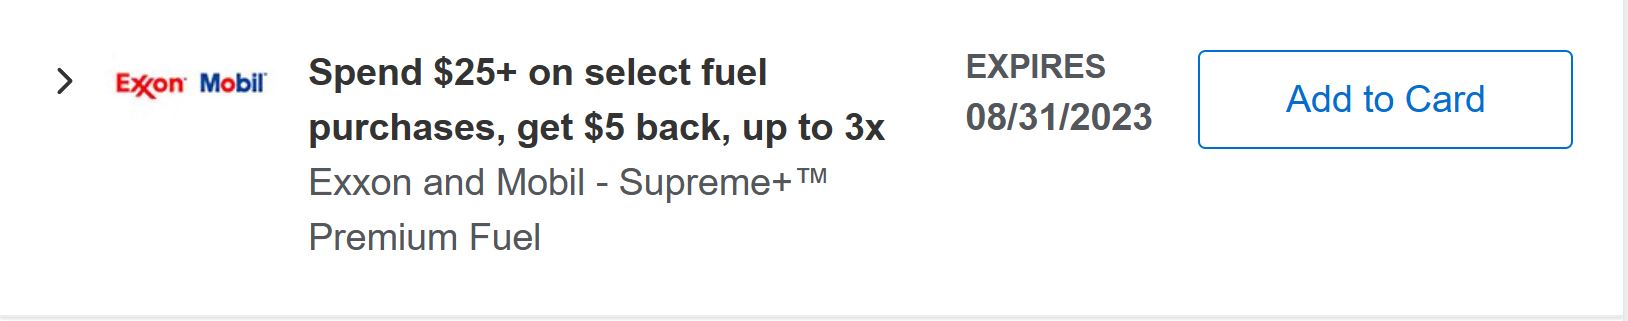 Amex Offers: Spend $25+ on select fuel purchases at Exxon Mobile, get $5 back, up to 3x.